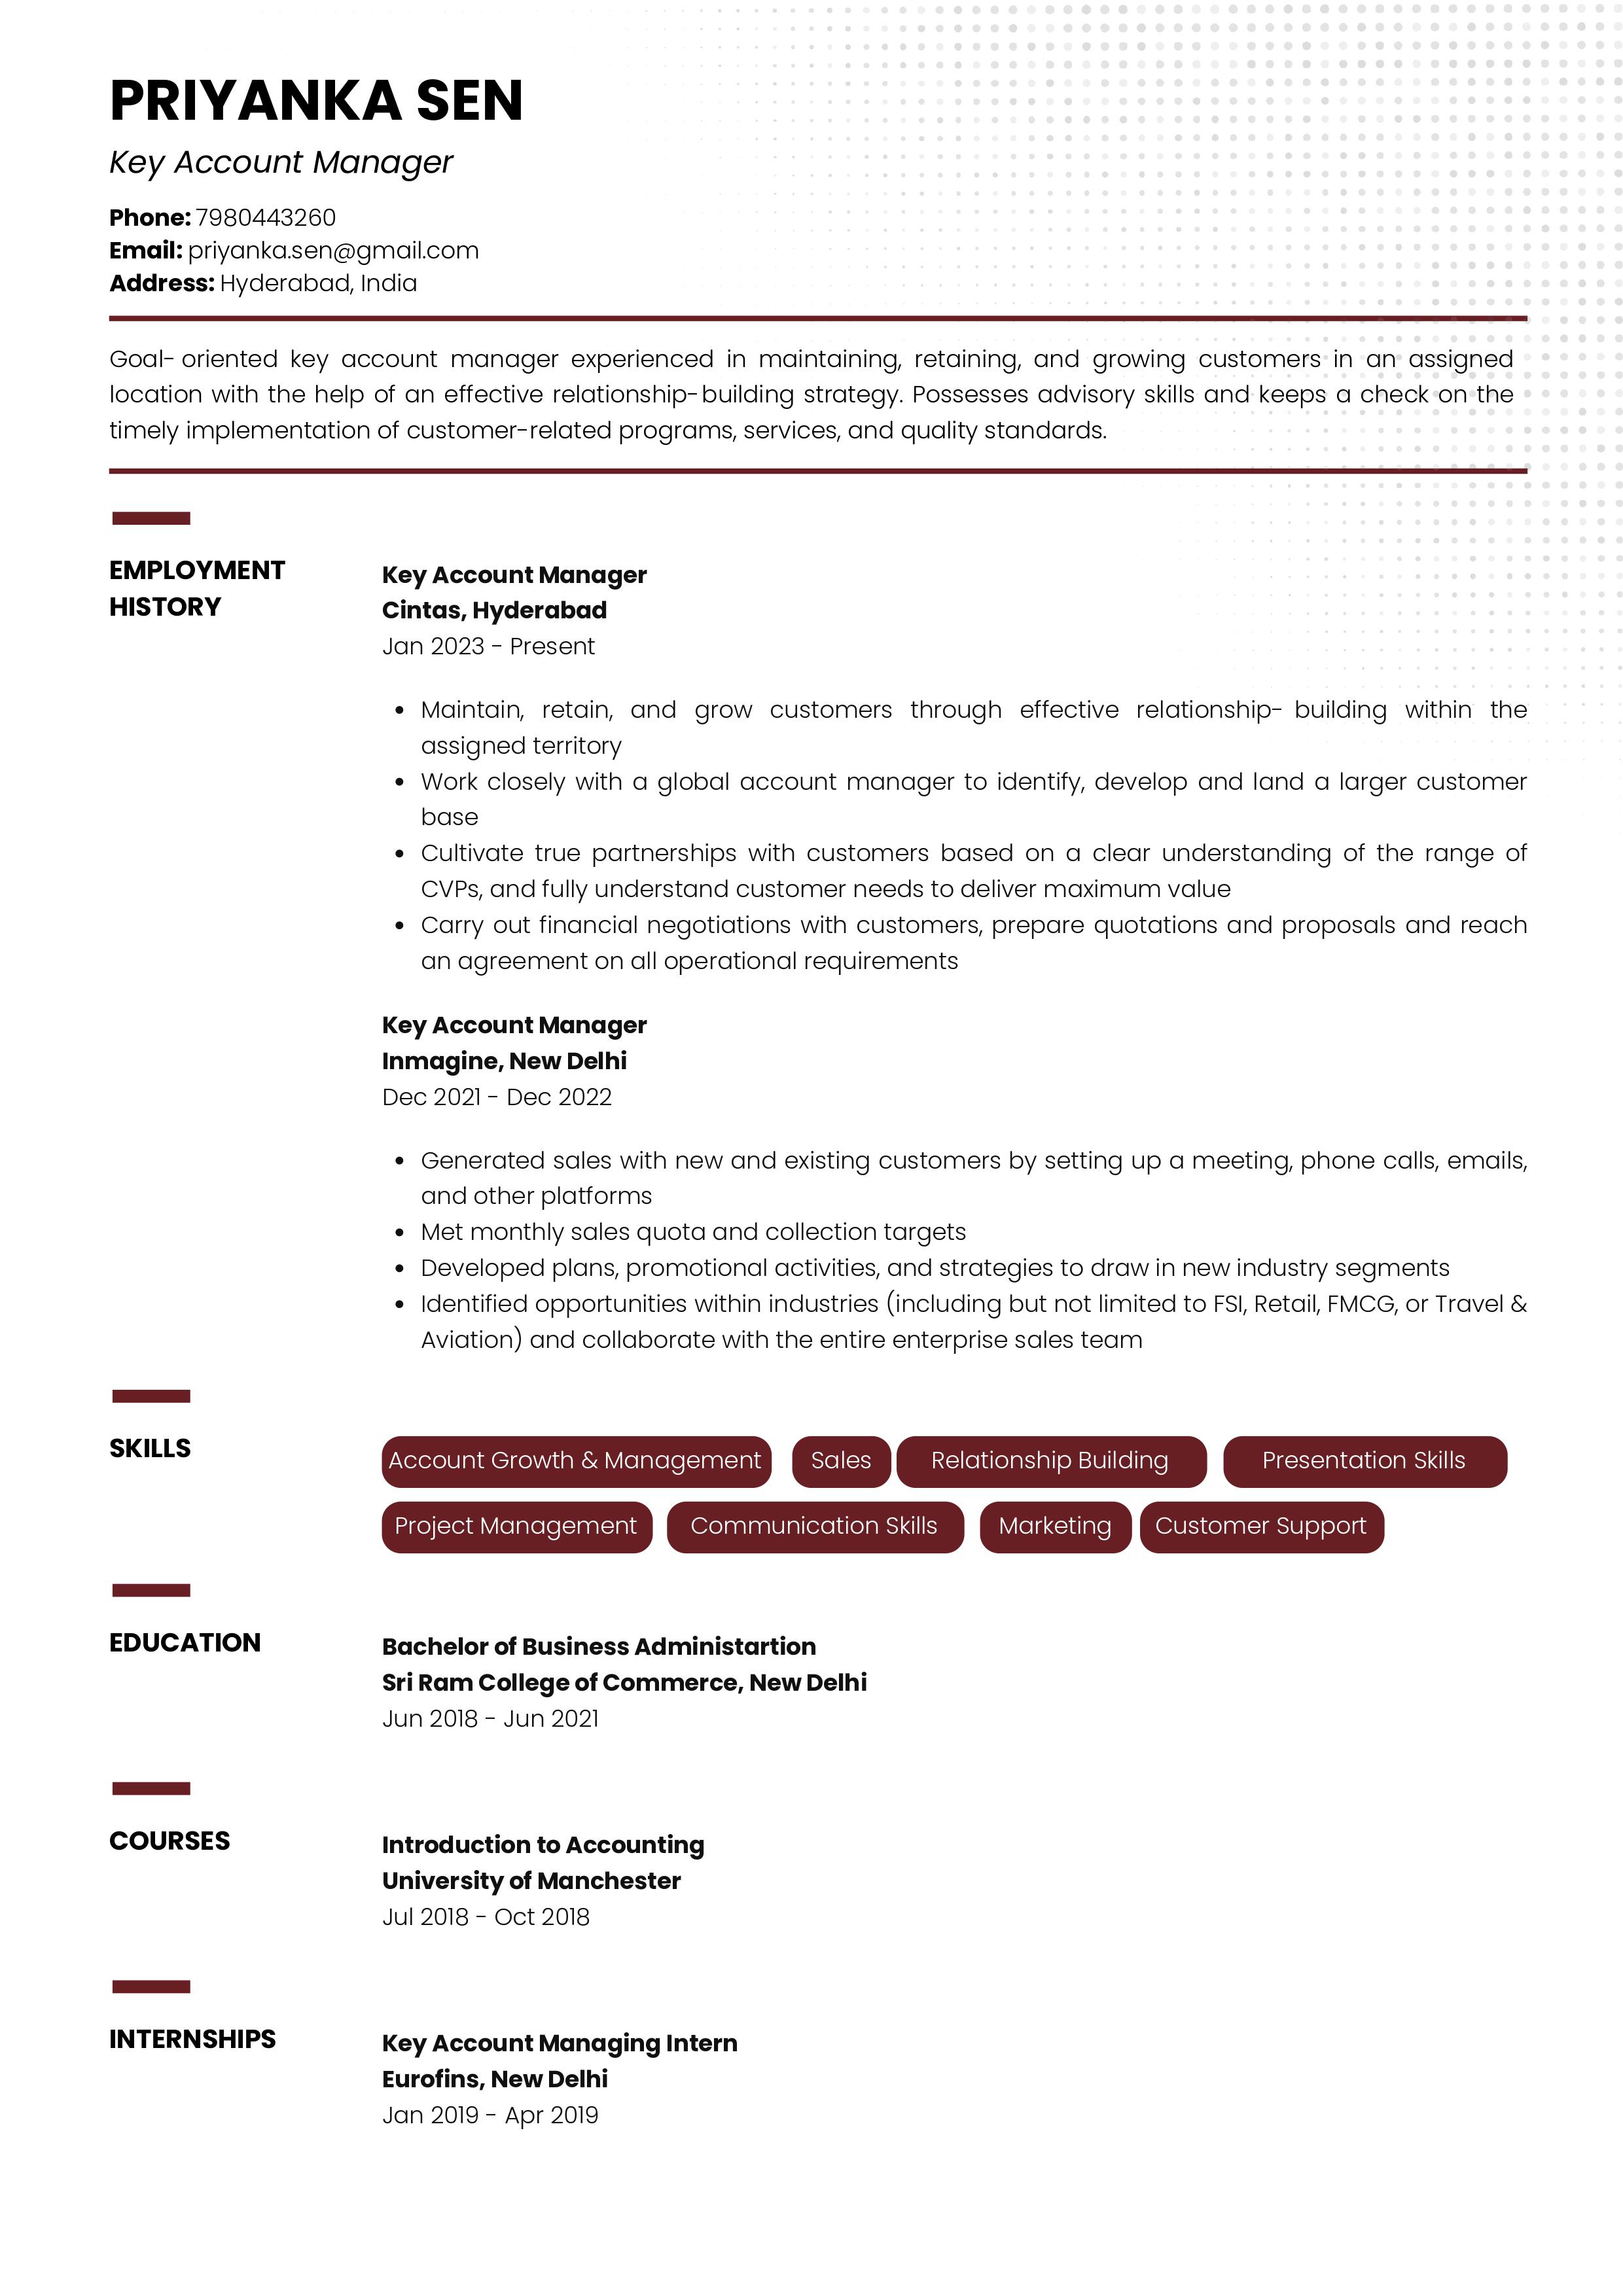 Resume of Key Account Manager